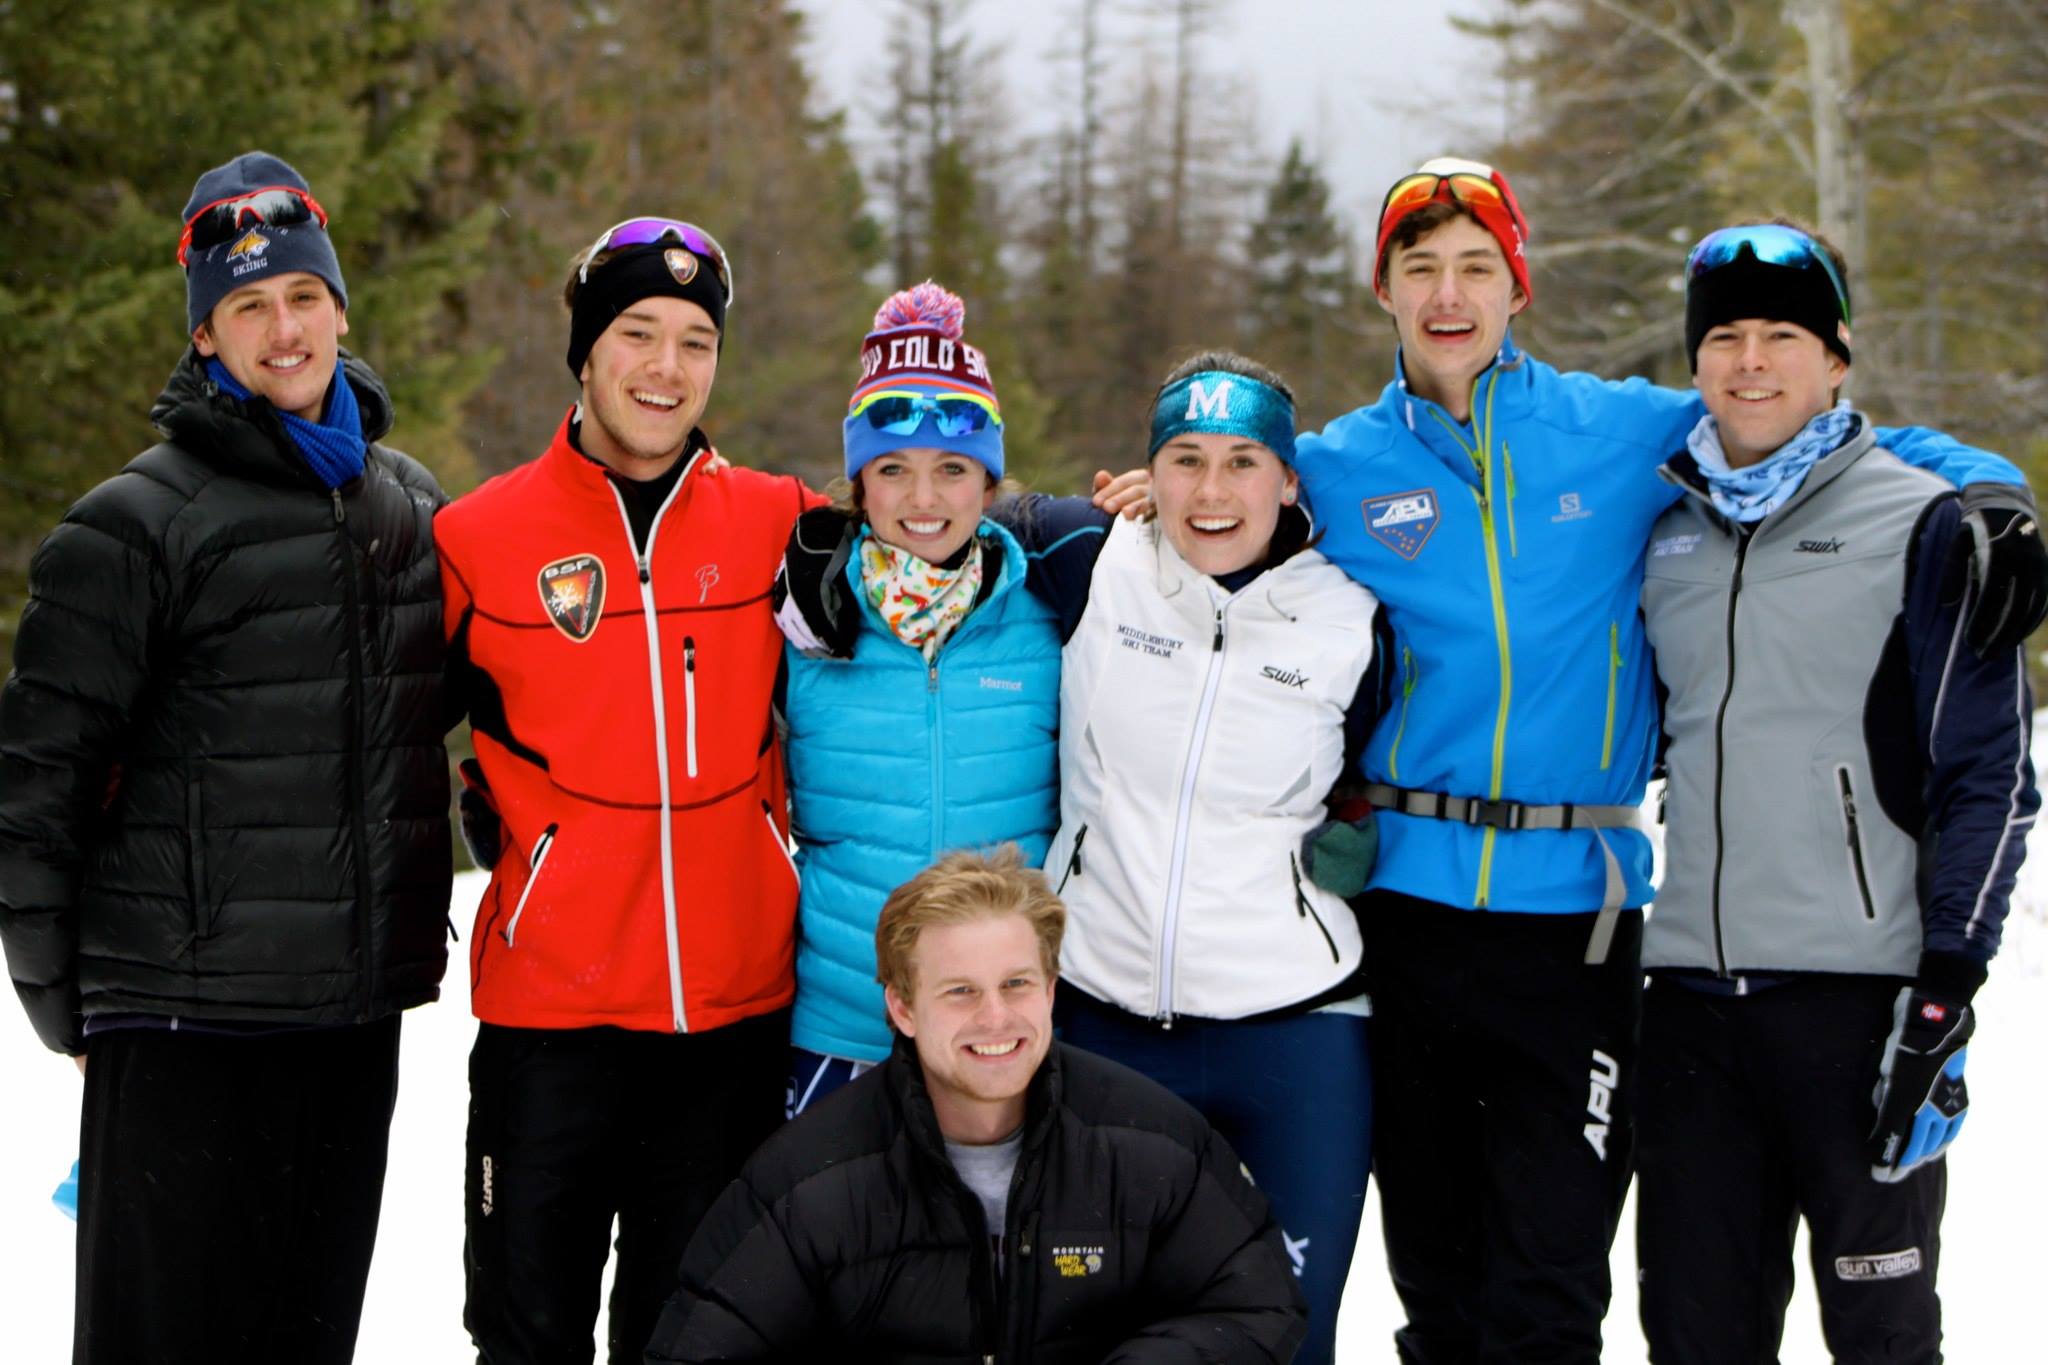 Left to Right: Mashall Opel,senior at Montana State University; Connor Gray, Bridger Ski Foundation (senior at Bozeman High School); Anne Miller, senior at University of New Hampshire; Stella Holt, junior at Middlebury College; Fischer Gangemi, freshman at Alaska Pacific University; Jack Steele, sophomore at Middlebury College and kneeling Carl Talsma, junior at Cornell and on the baseball team, but skied with GNST through high school.